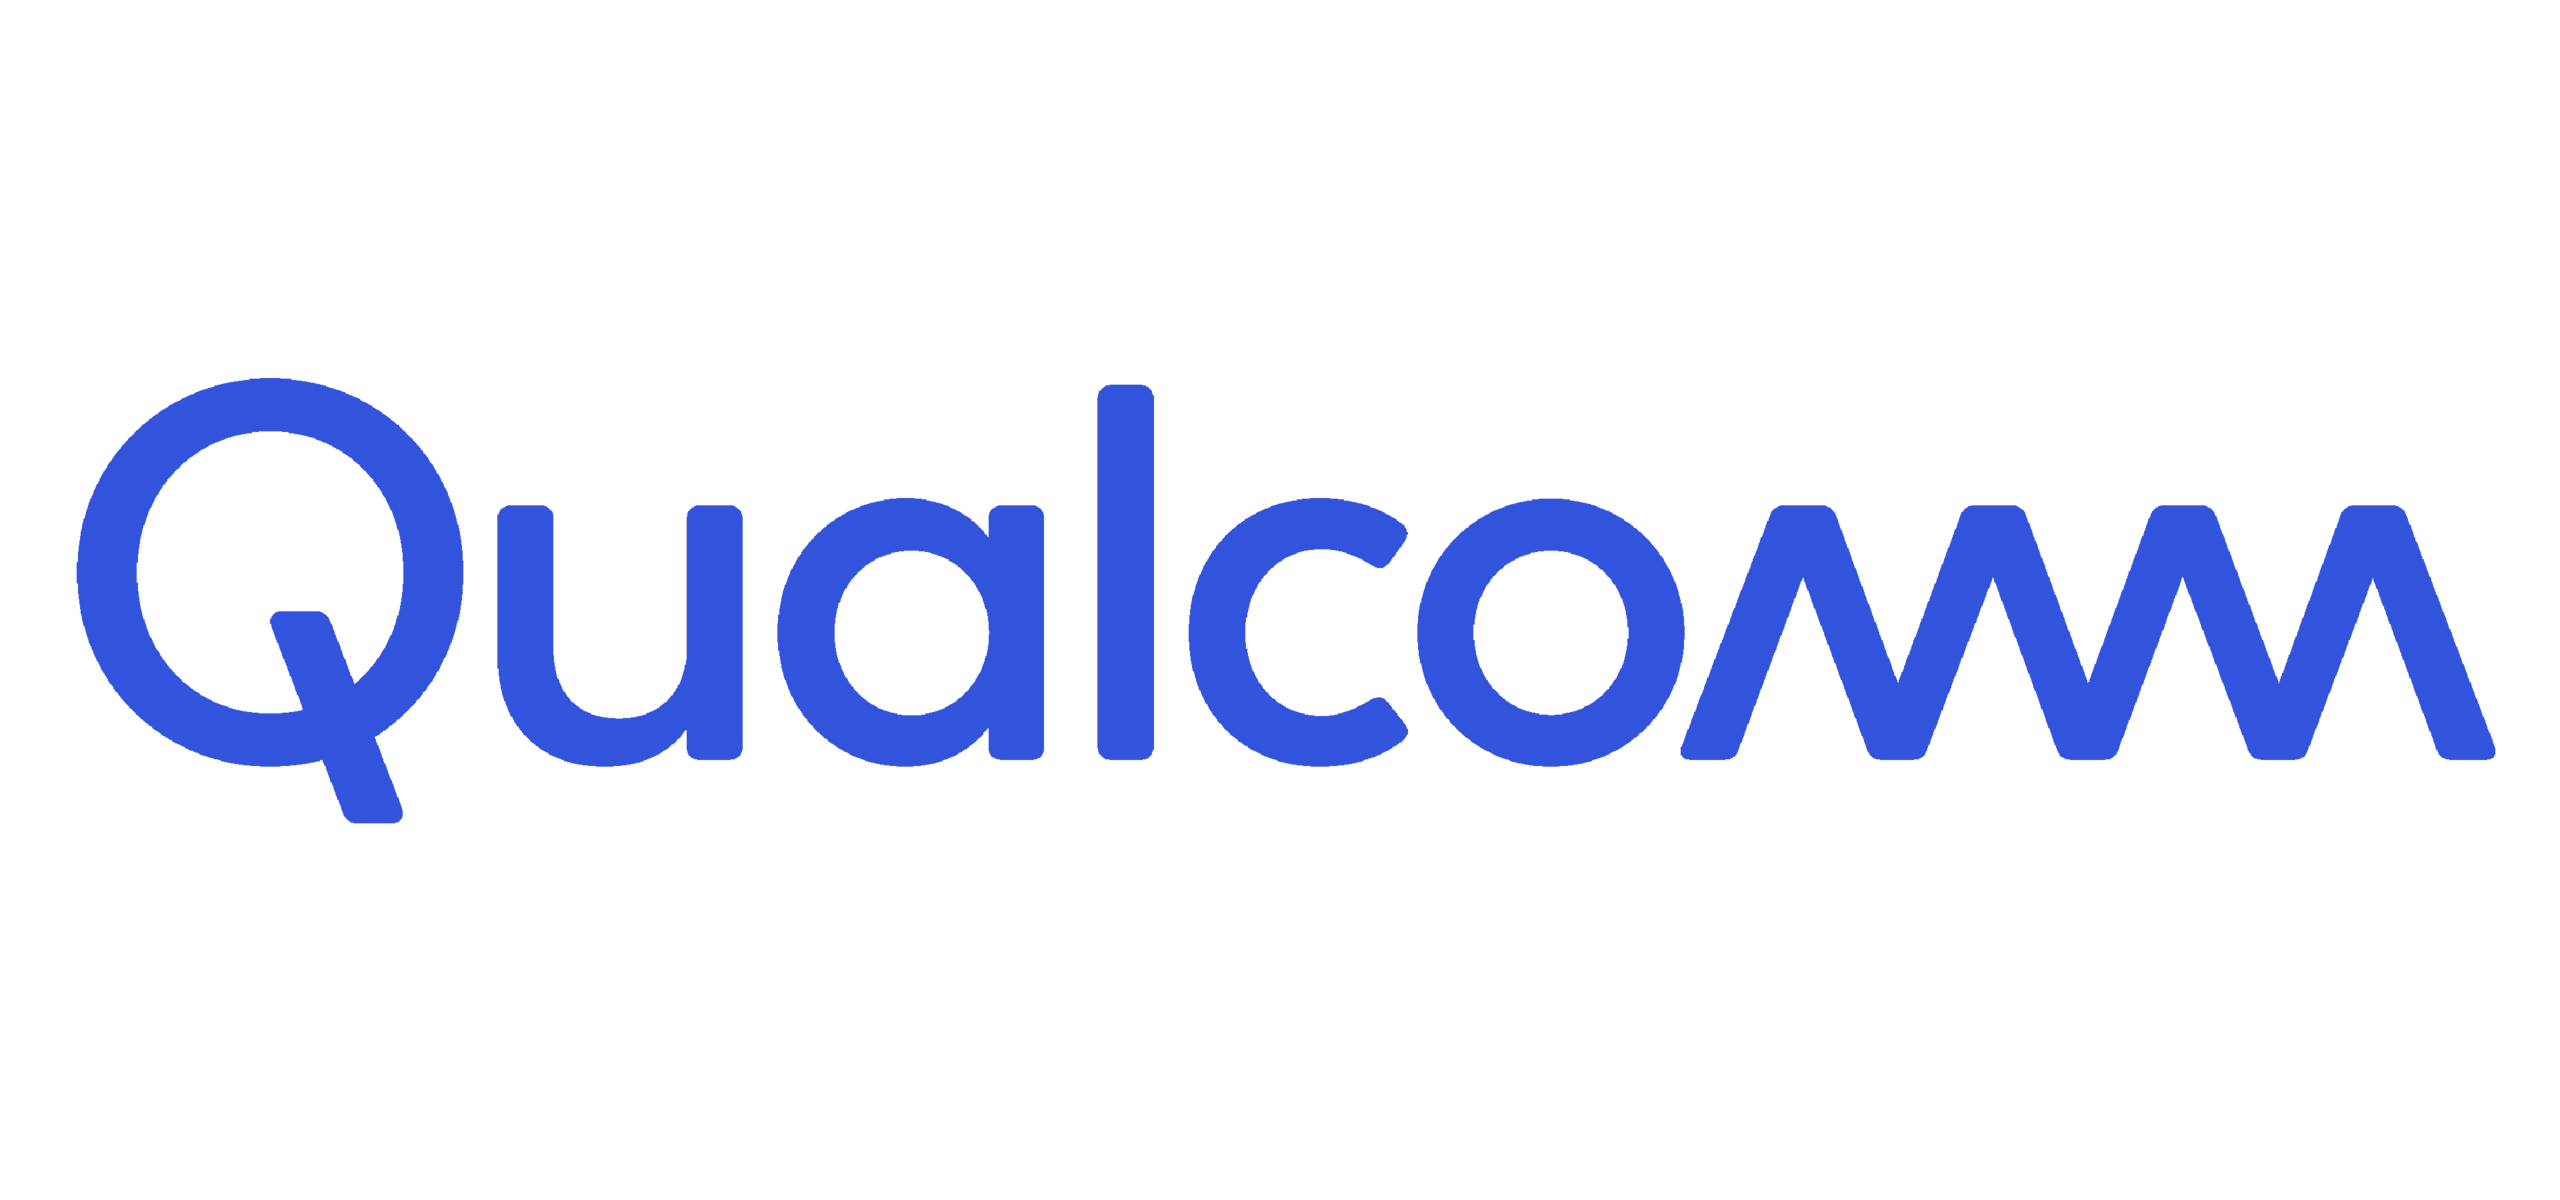 Chipmaker Qualcomm warns of three actively exploited zero-days – Source: securityaffairs.com